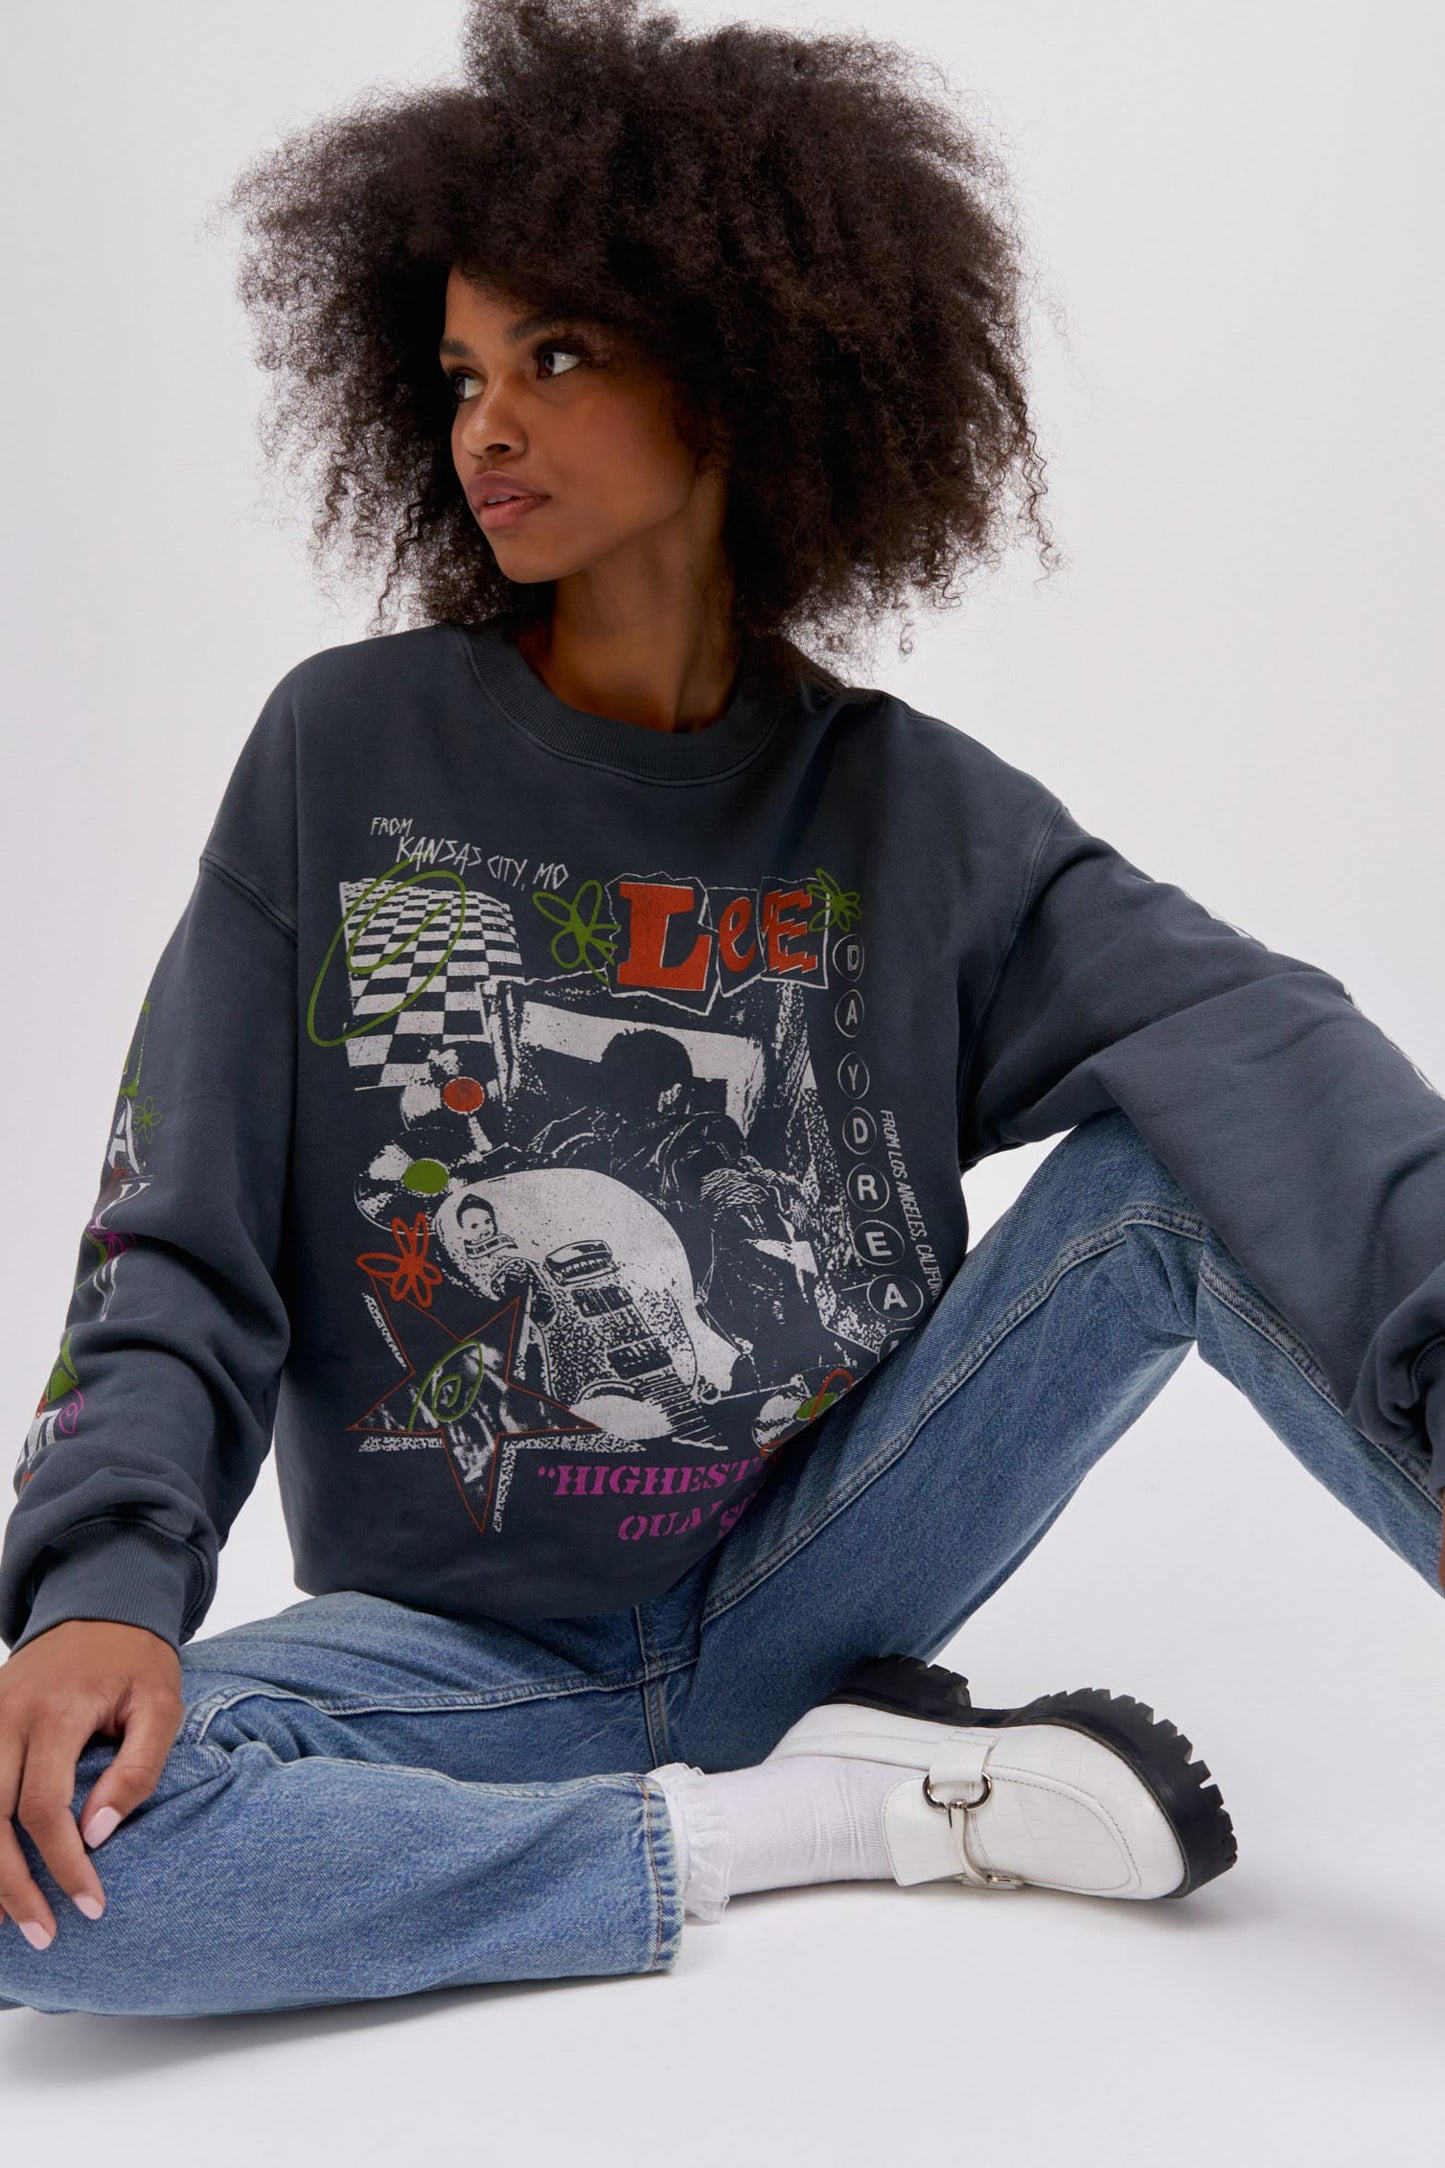 Sitting curly haired model wearing a Lee x Daydreamer collab graphic sweatshirt in washed black.